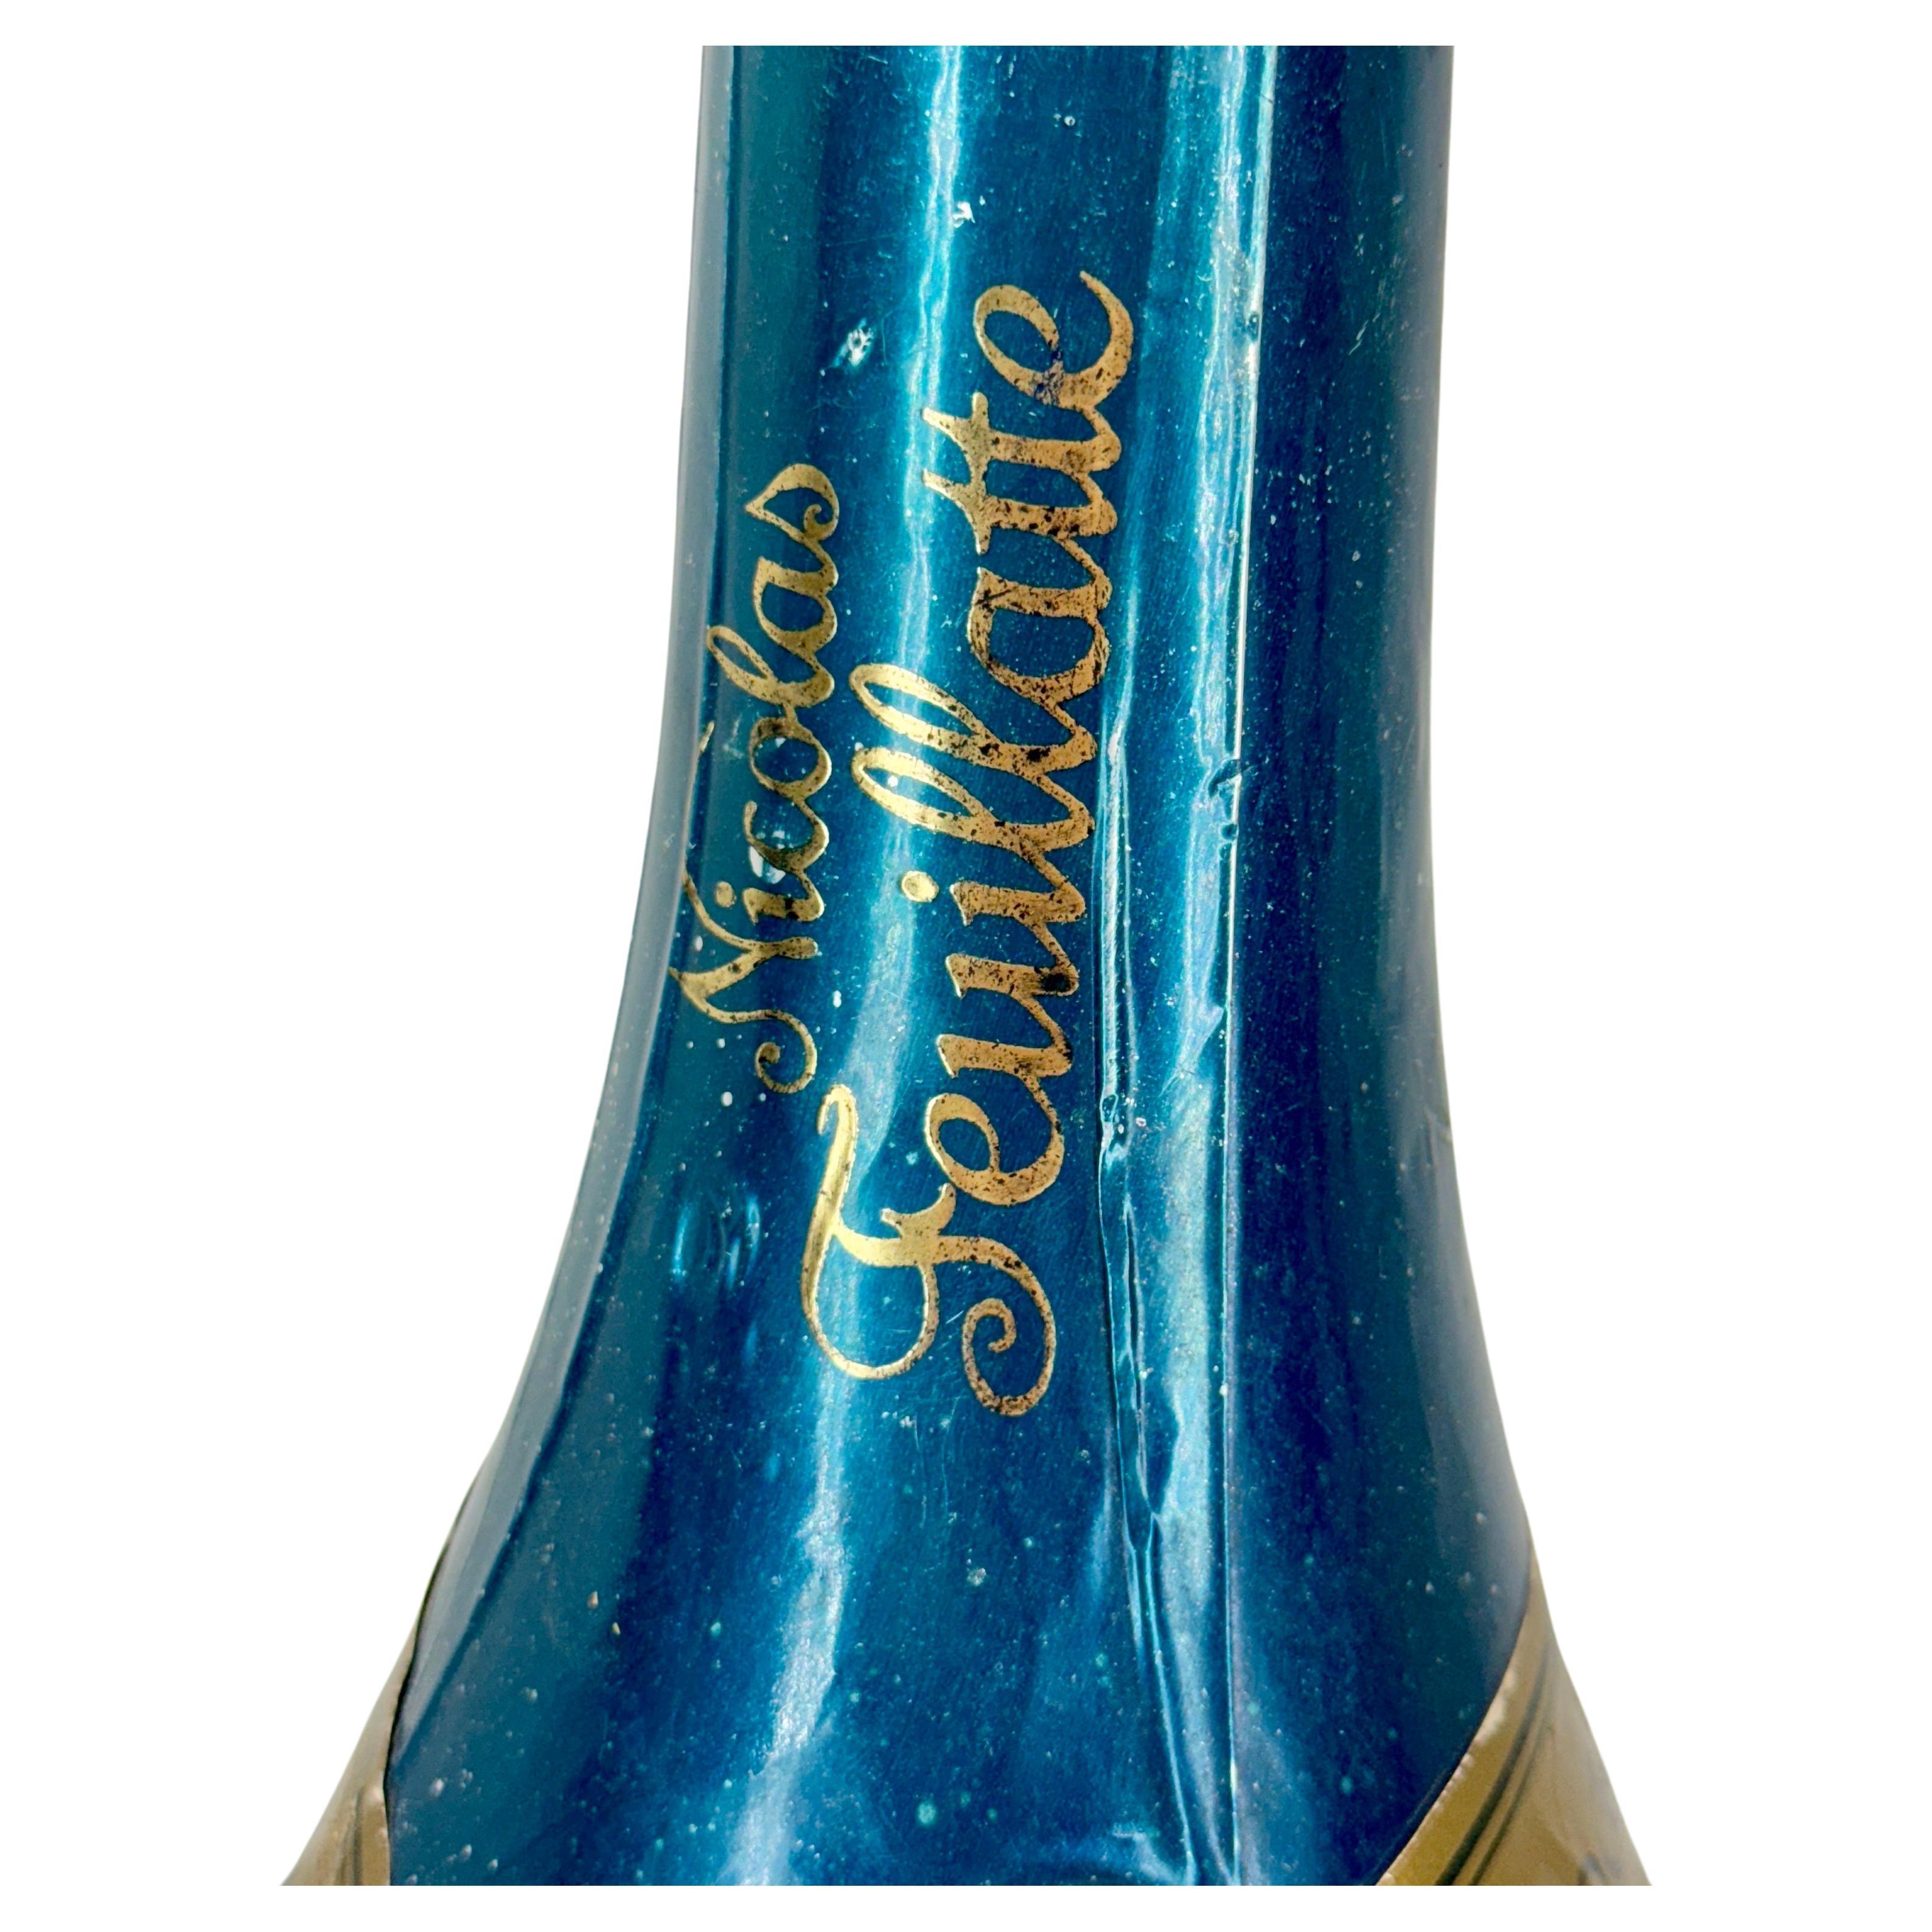 Mid-20th Century Large French Nicolas Feuillatte Magnum Champagne Bottle  For Sale